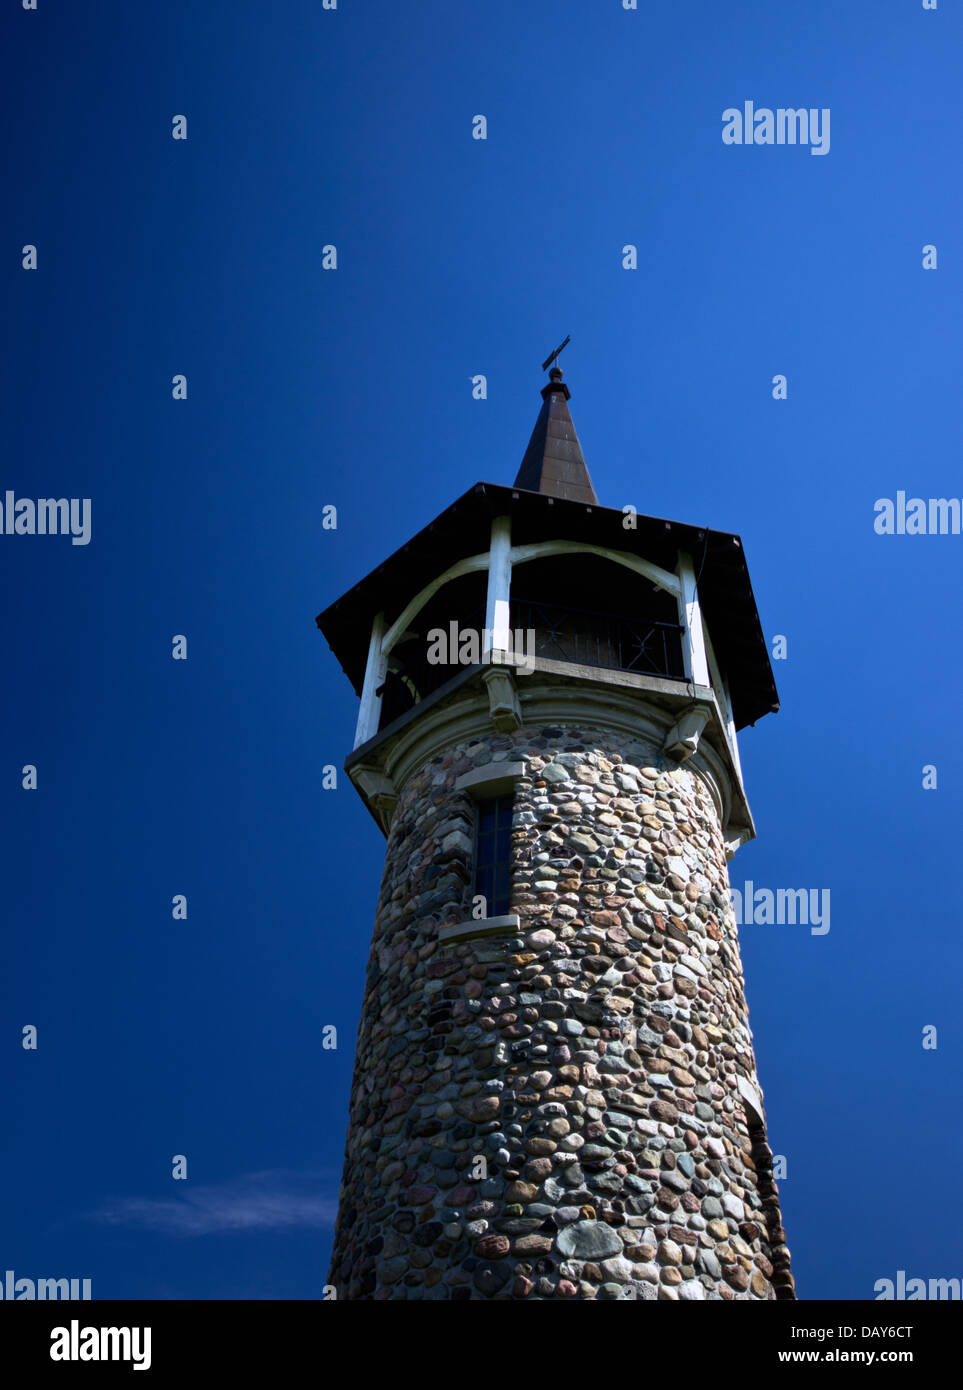 The Pioneer Memorial Tower in Kitchener, Ontario, Canada. Stock Photo